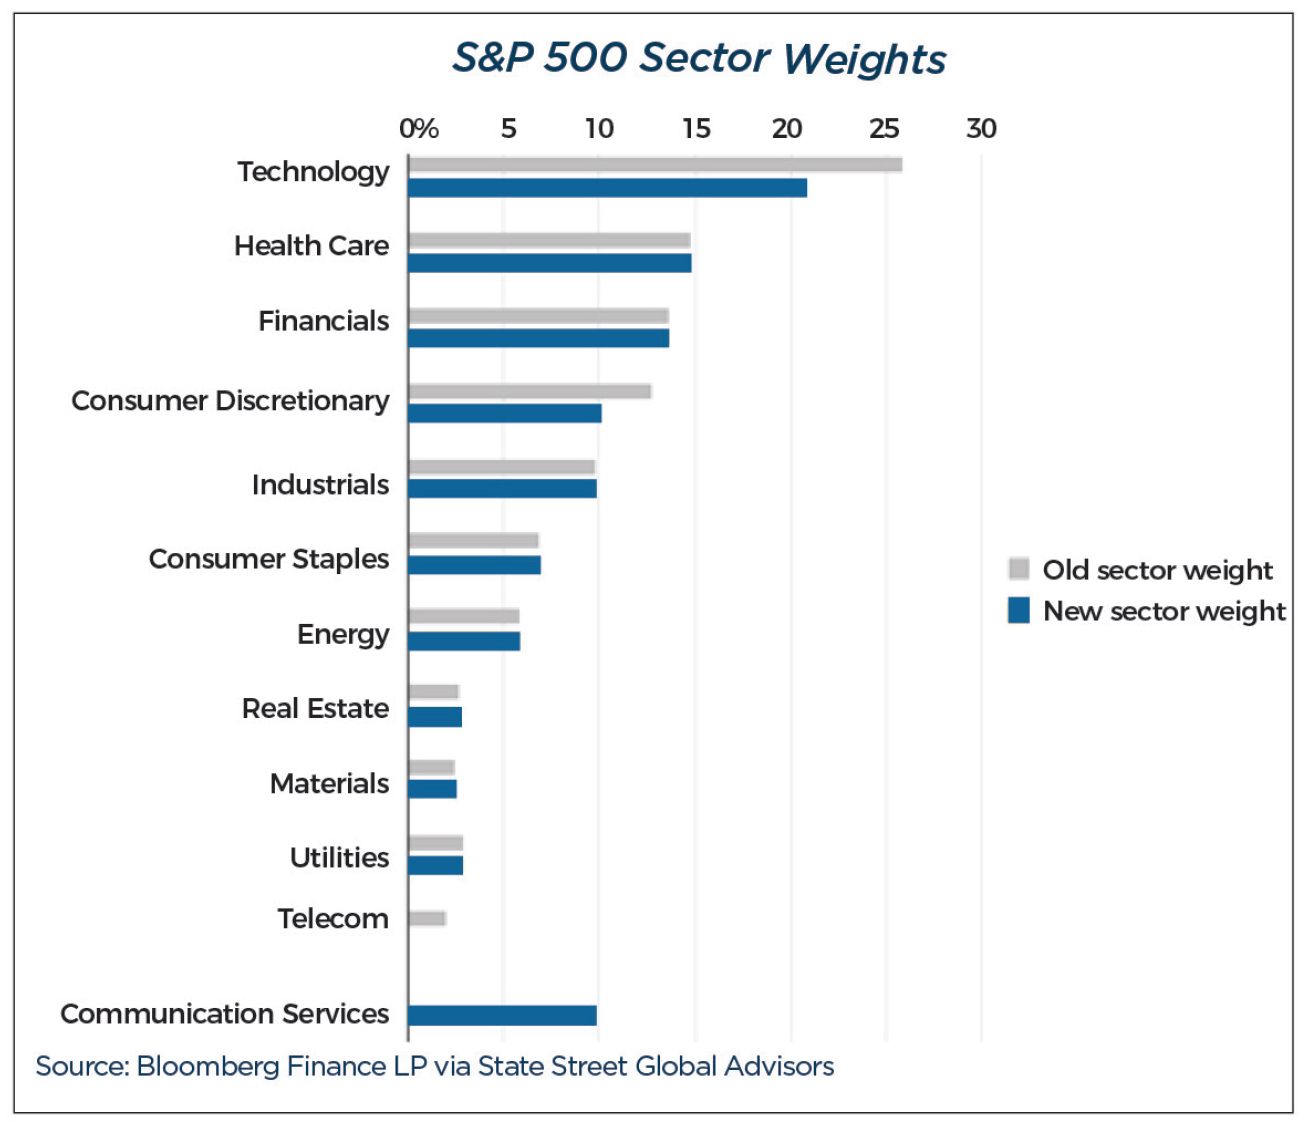 Graph showing S&P 500 Sector Weights for 3Q18.